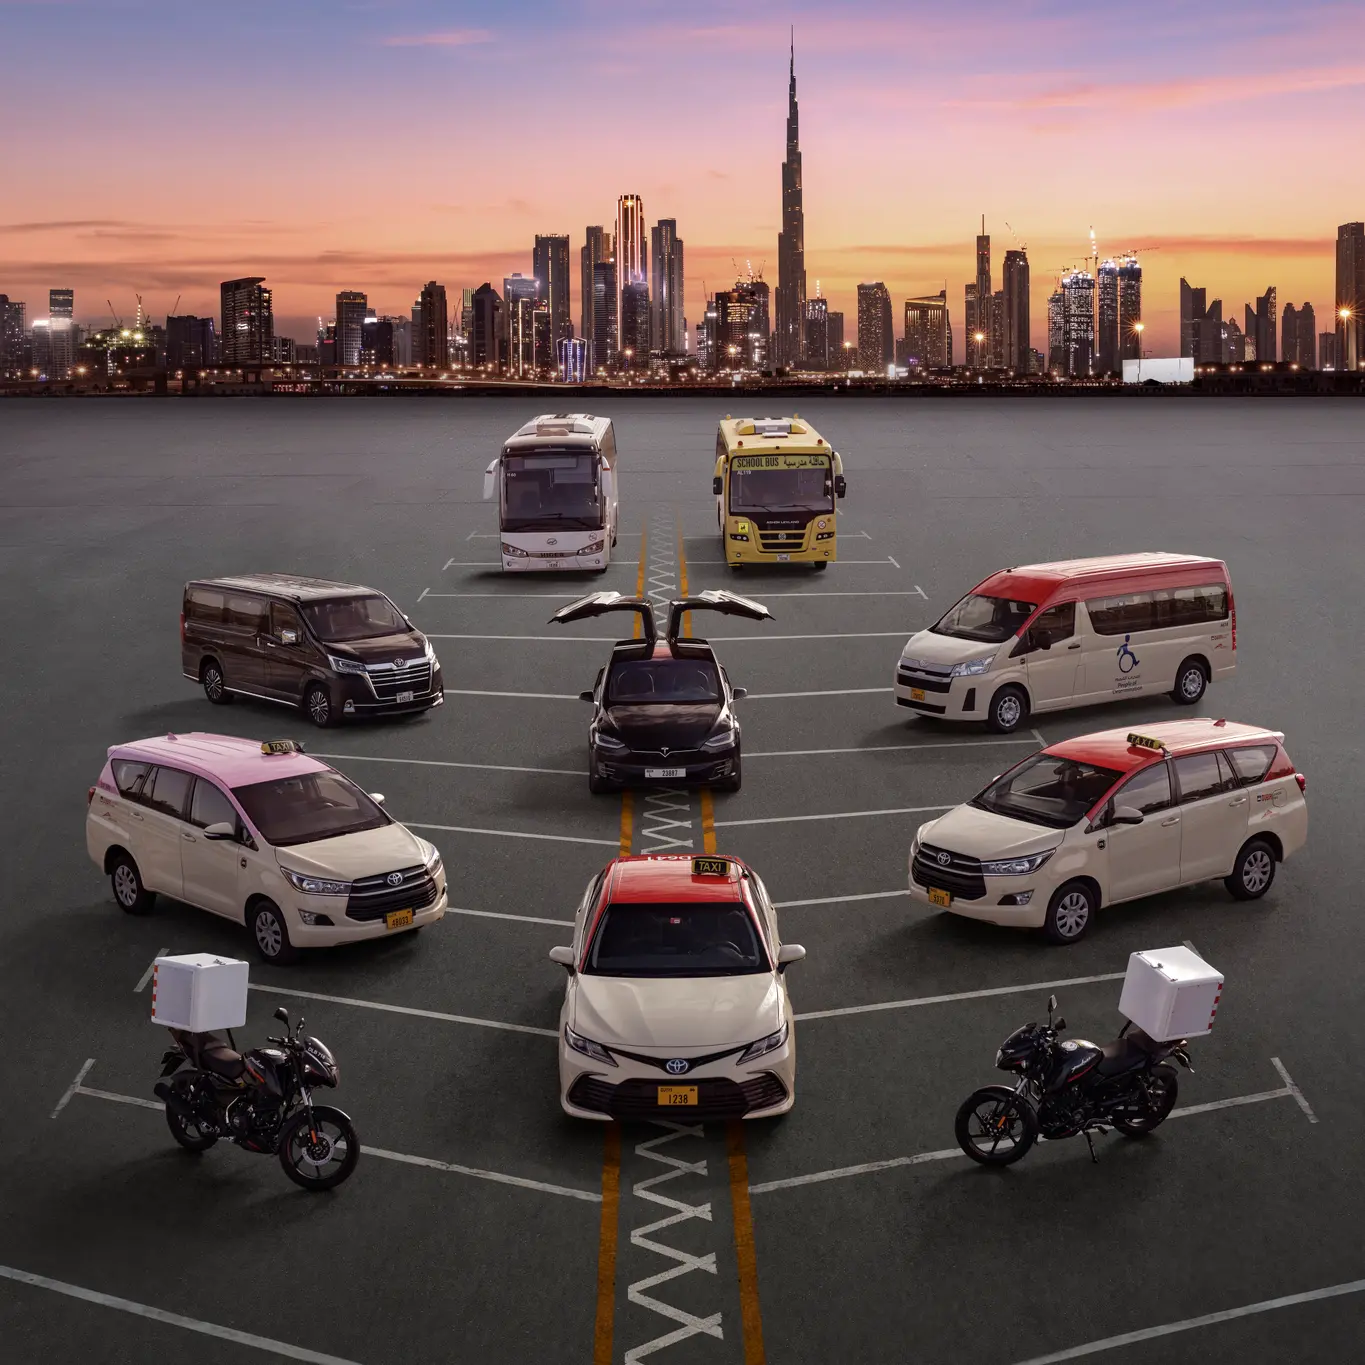 Dubai Taxi Company to offer 24.99% stake in IPO